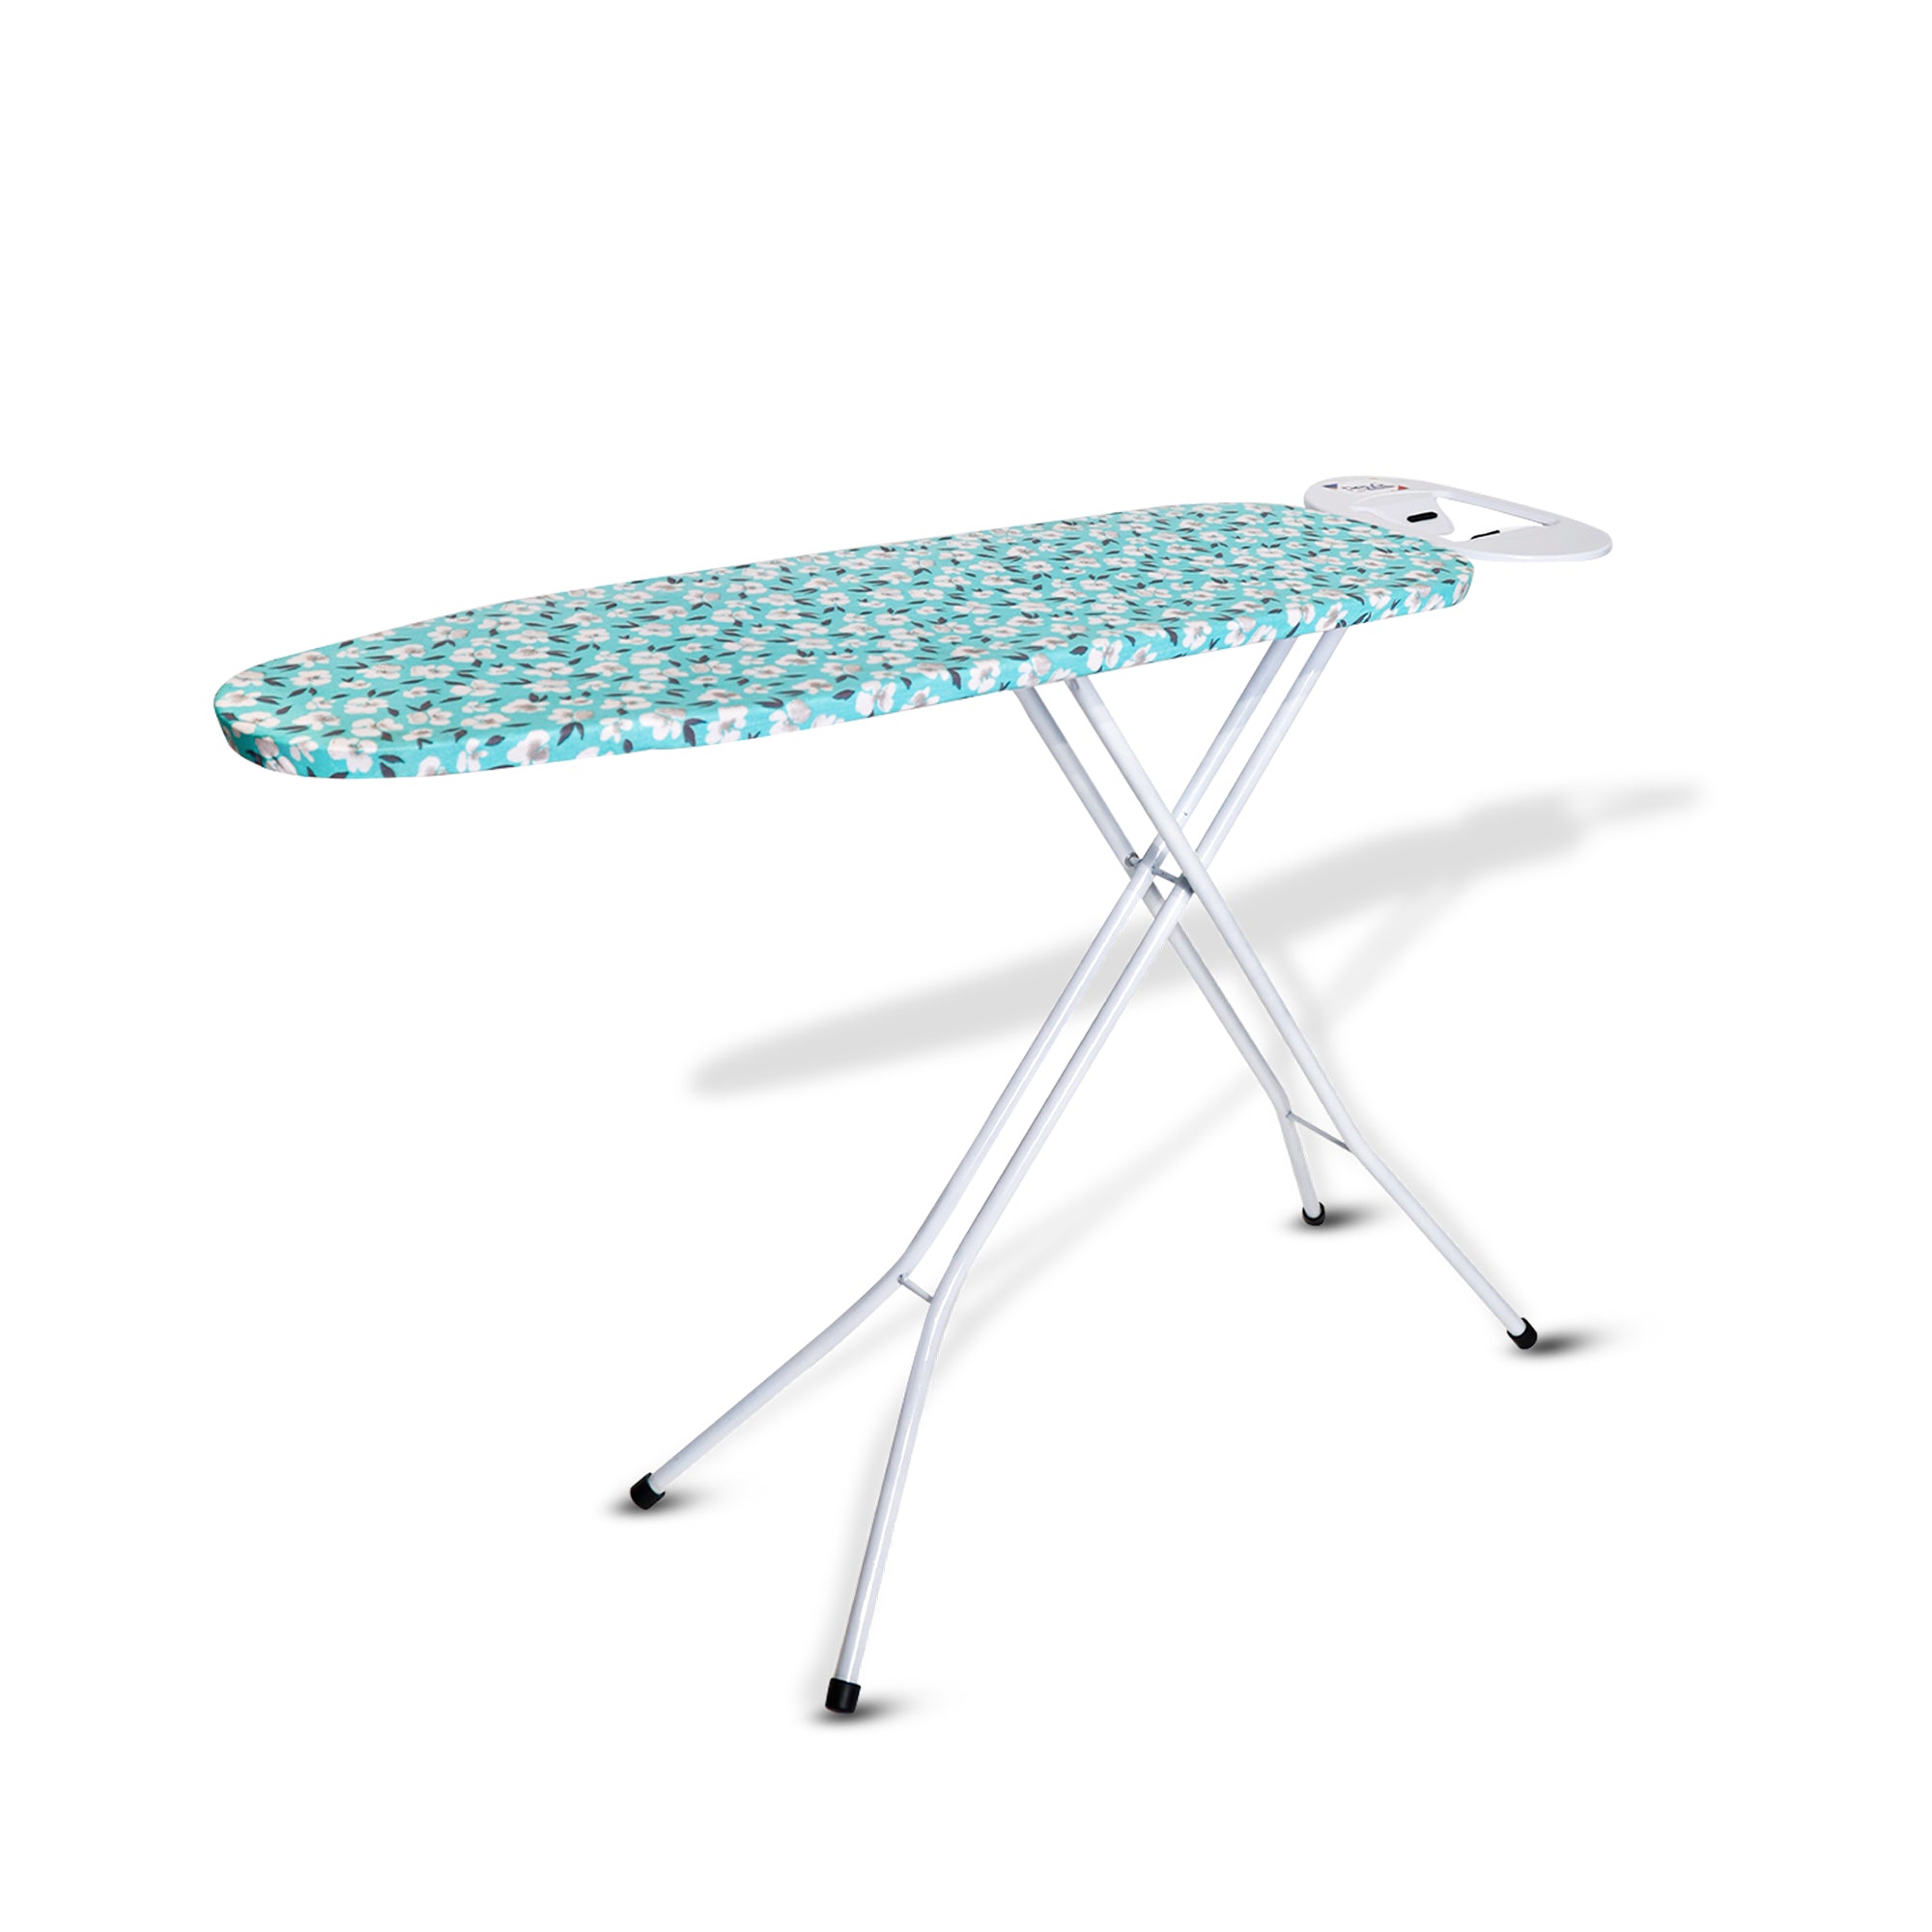 Seville Ironing Board | H-Leg Height Adjustable Ironing Board with Silicone Iron Rest  I Green